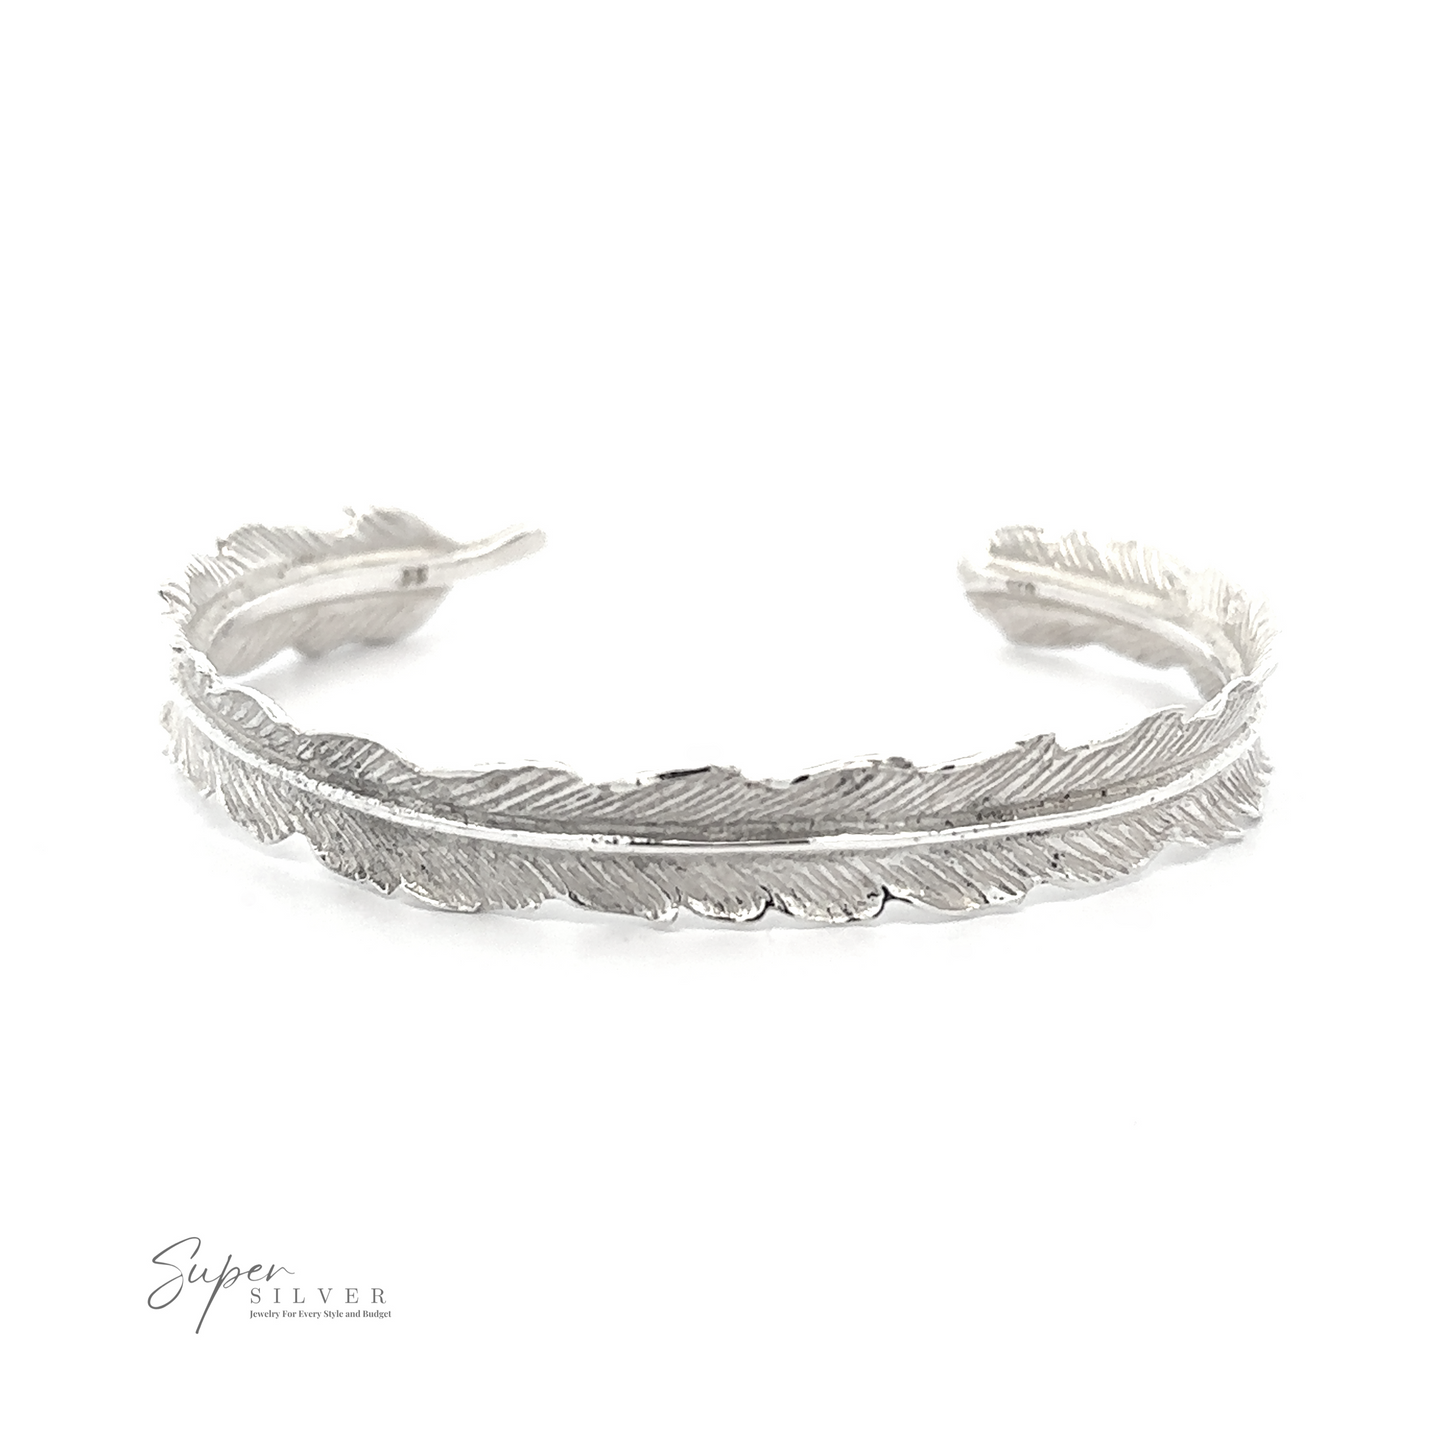 A Detailed Feather Cuff shaped like a feather, positioned with open ends facing forward. The bracelet has detailed feather patterns and textures, giving it a vintage feel. A small "Super Silver" logo is present in the bottom left corner.